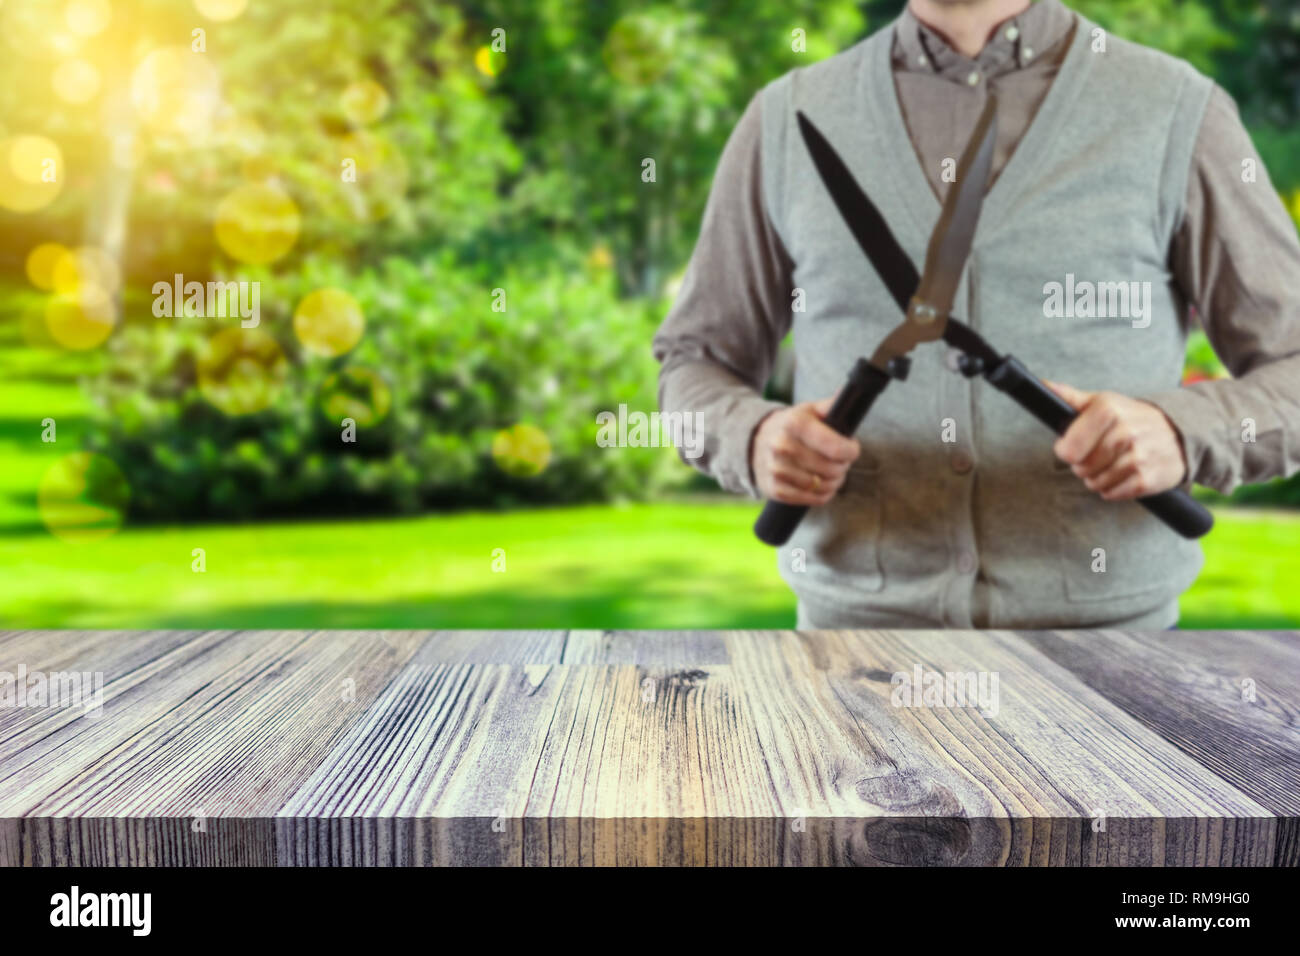 Empty table top for product display montage. Gardener holding a hedgecutter blurred in the background. Gardening concept. Stock Photo